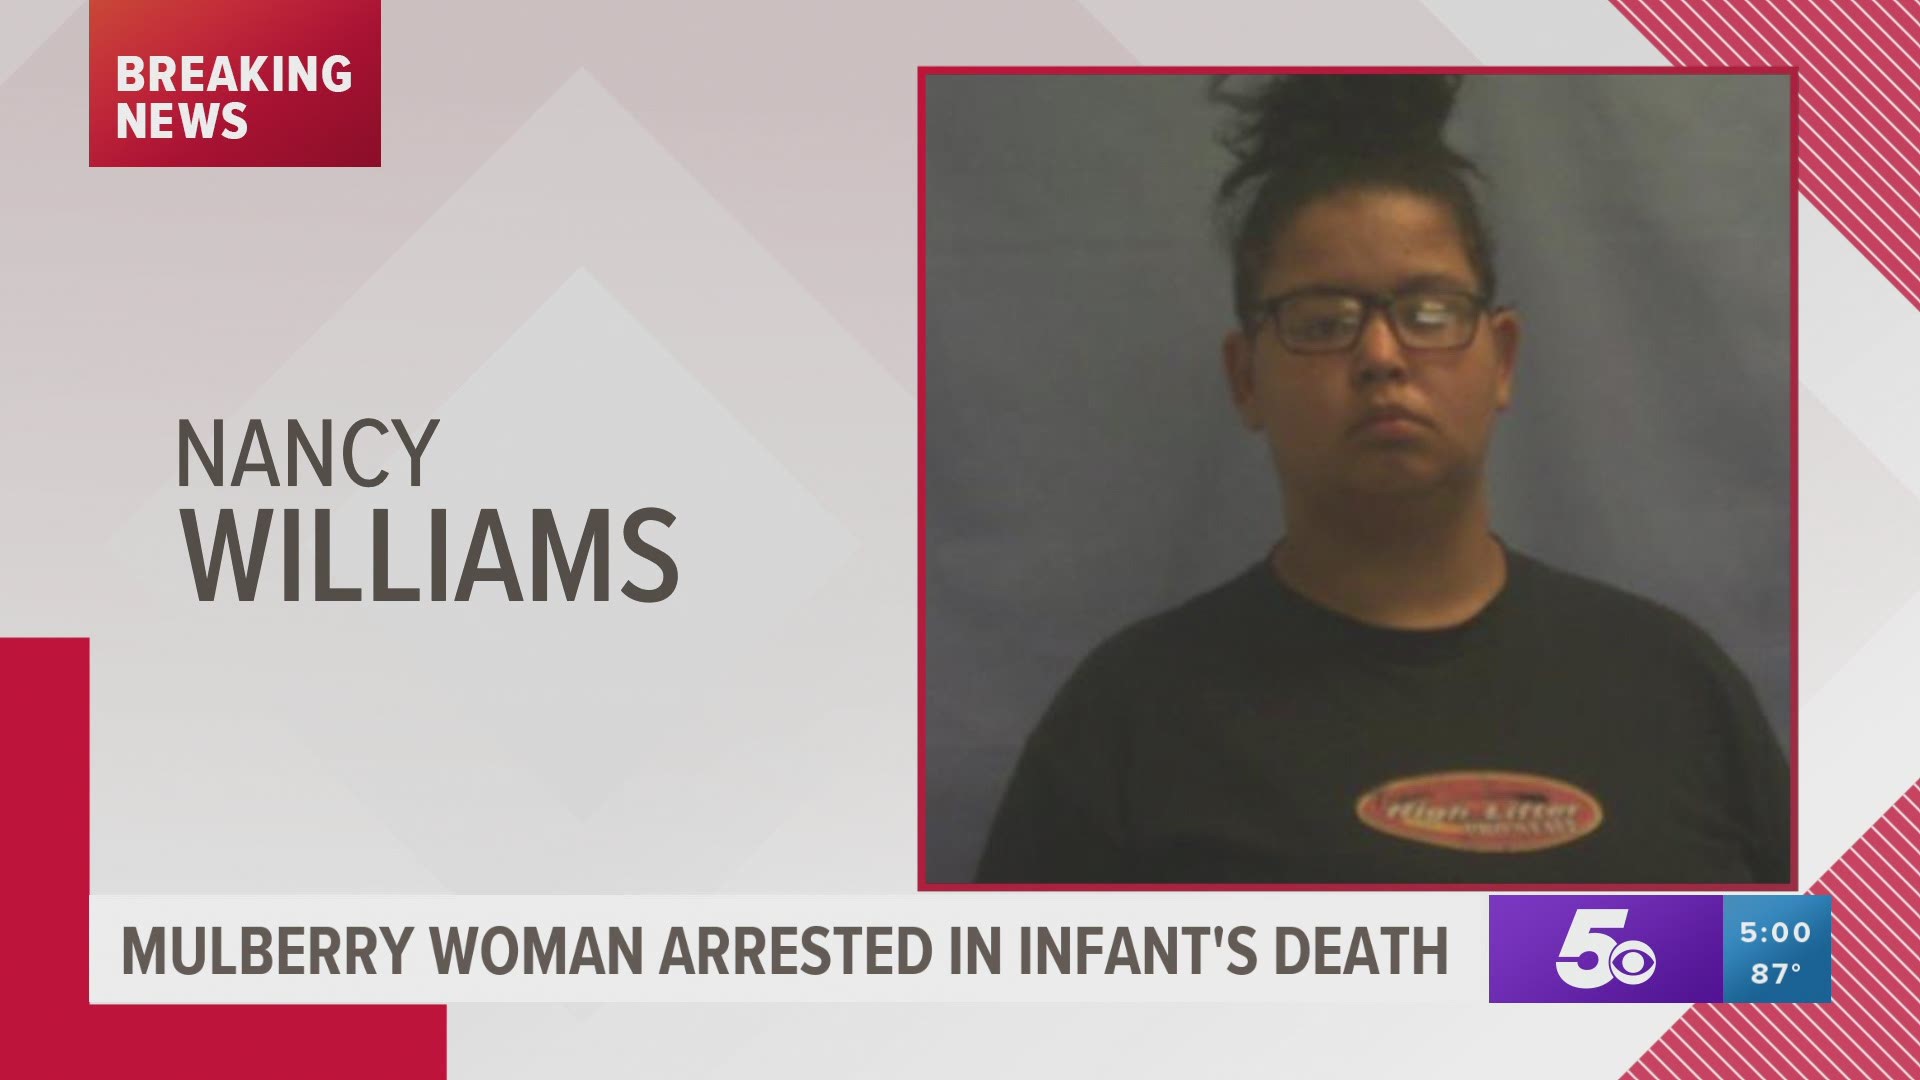 Nancy Williams confessed to the police that she shoved a baby wipe down the infant's throat to get him to stop crying, according to court records.